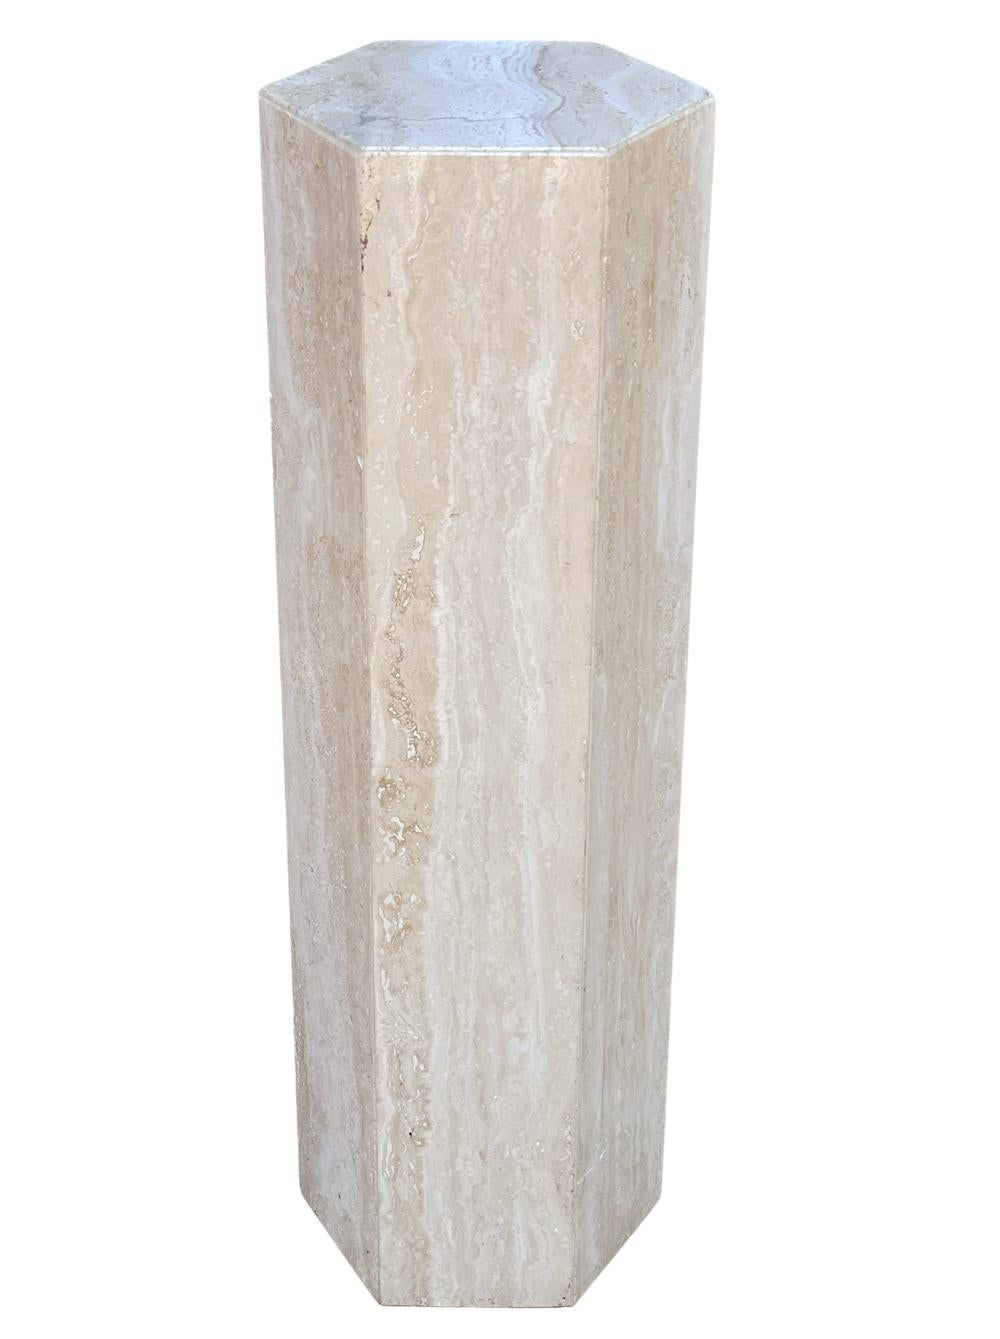 A tall and sleek looking pedestal from Italy, circa 1980s. It consists of thick solid travertine construction in a hexagonal form. Very good condition.